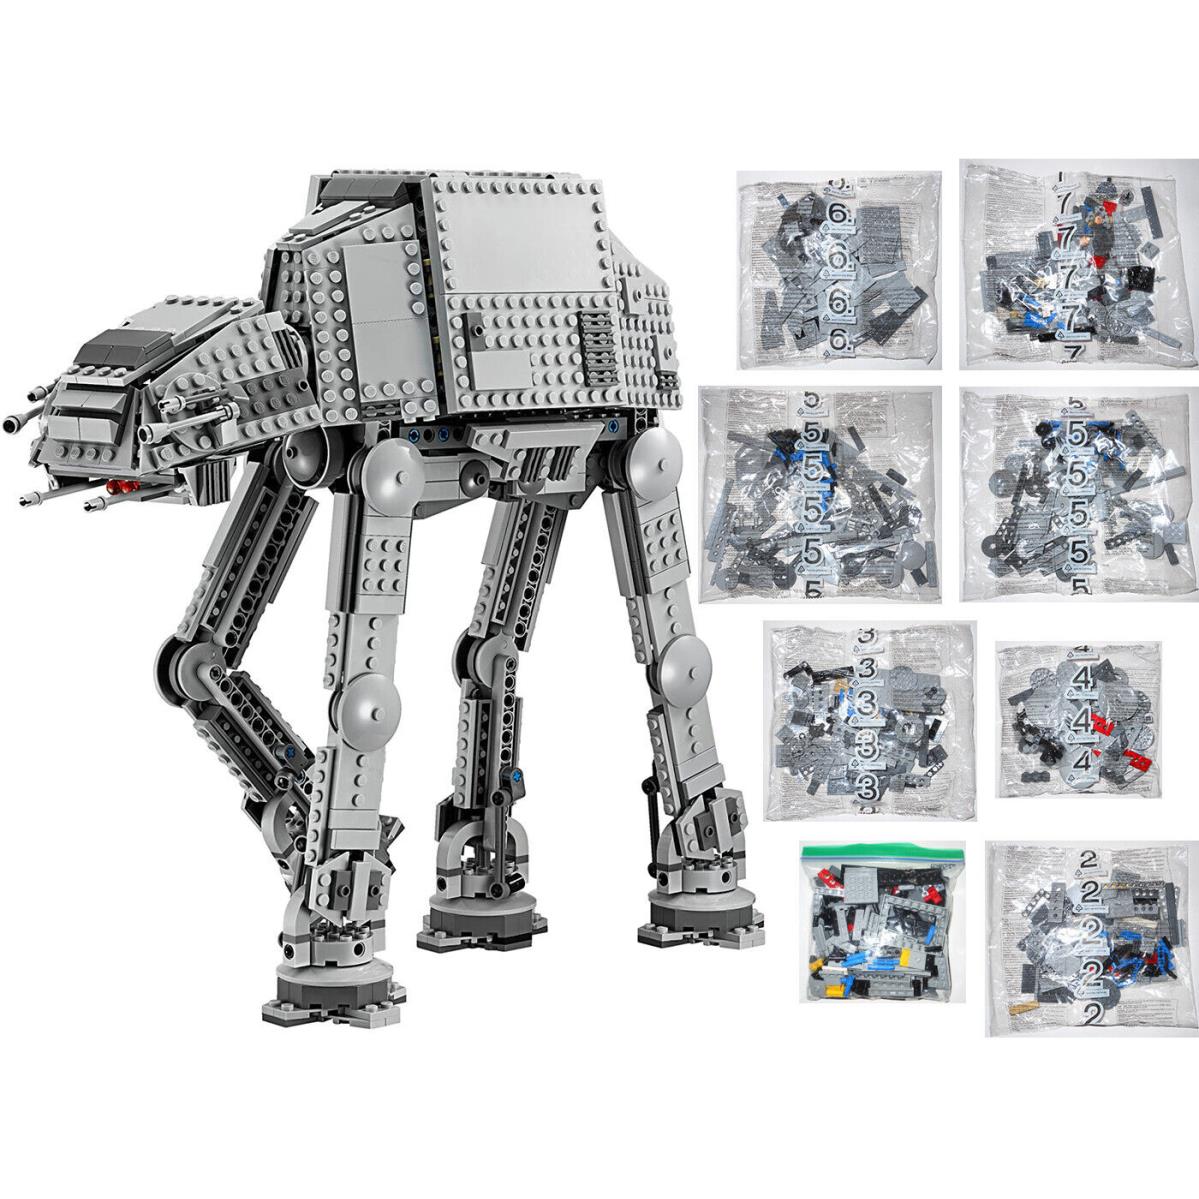 Lego 75054 At-at -- Set Bags For At-at Build Only -- Star Wars Imperial 2014